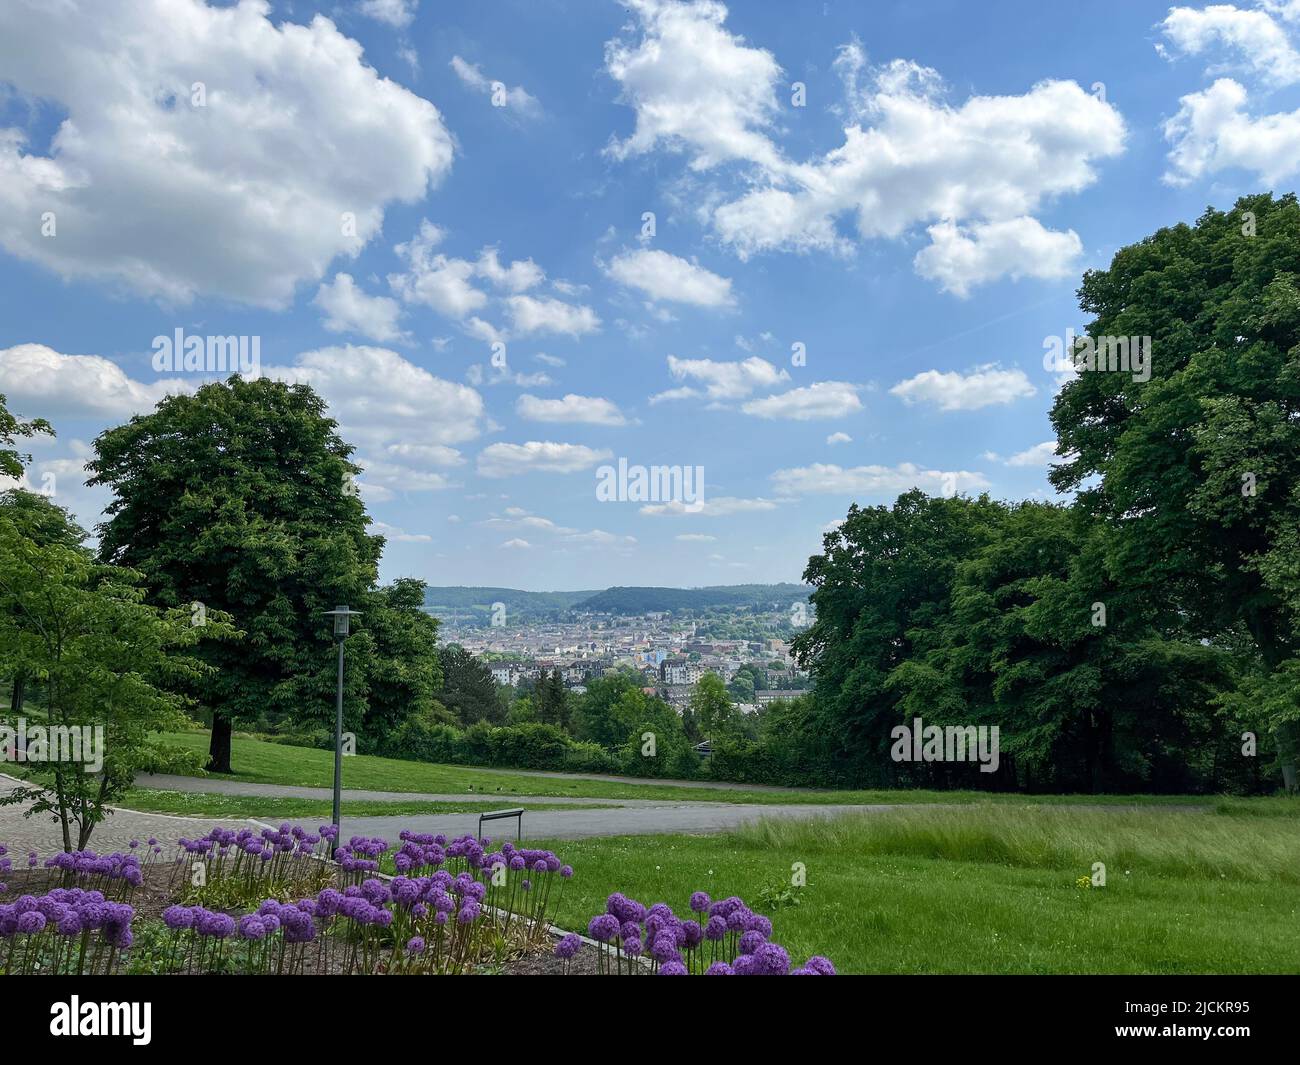 Wide Shot of Public Park Nordpark in Wuppertal, Germany. Patch of blooming Giant Onions in the foreground under a blue sky with picturesque clouds. Ci Stock Photo